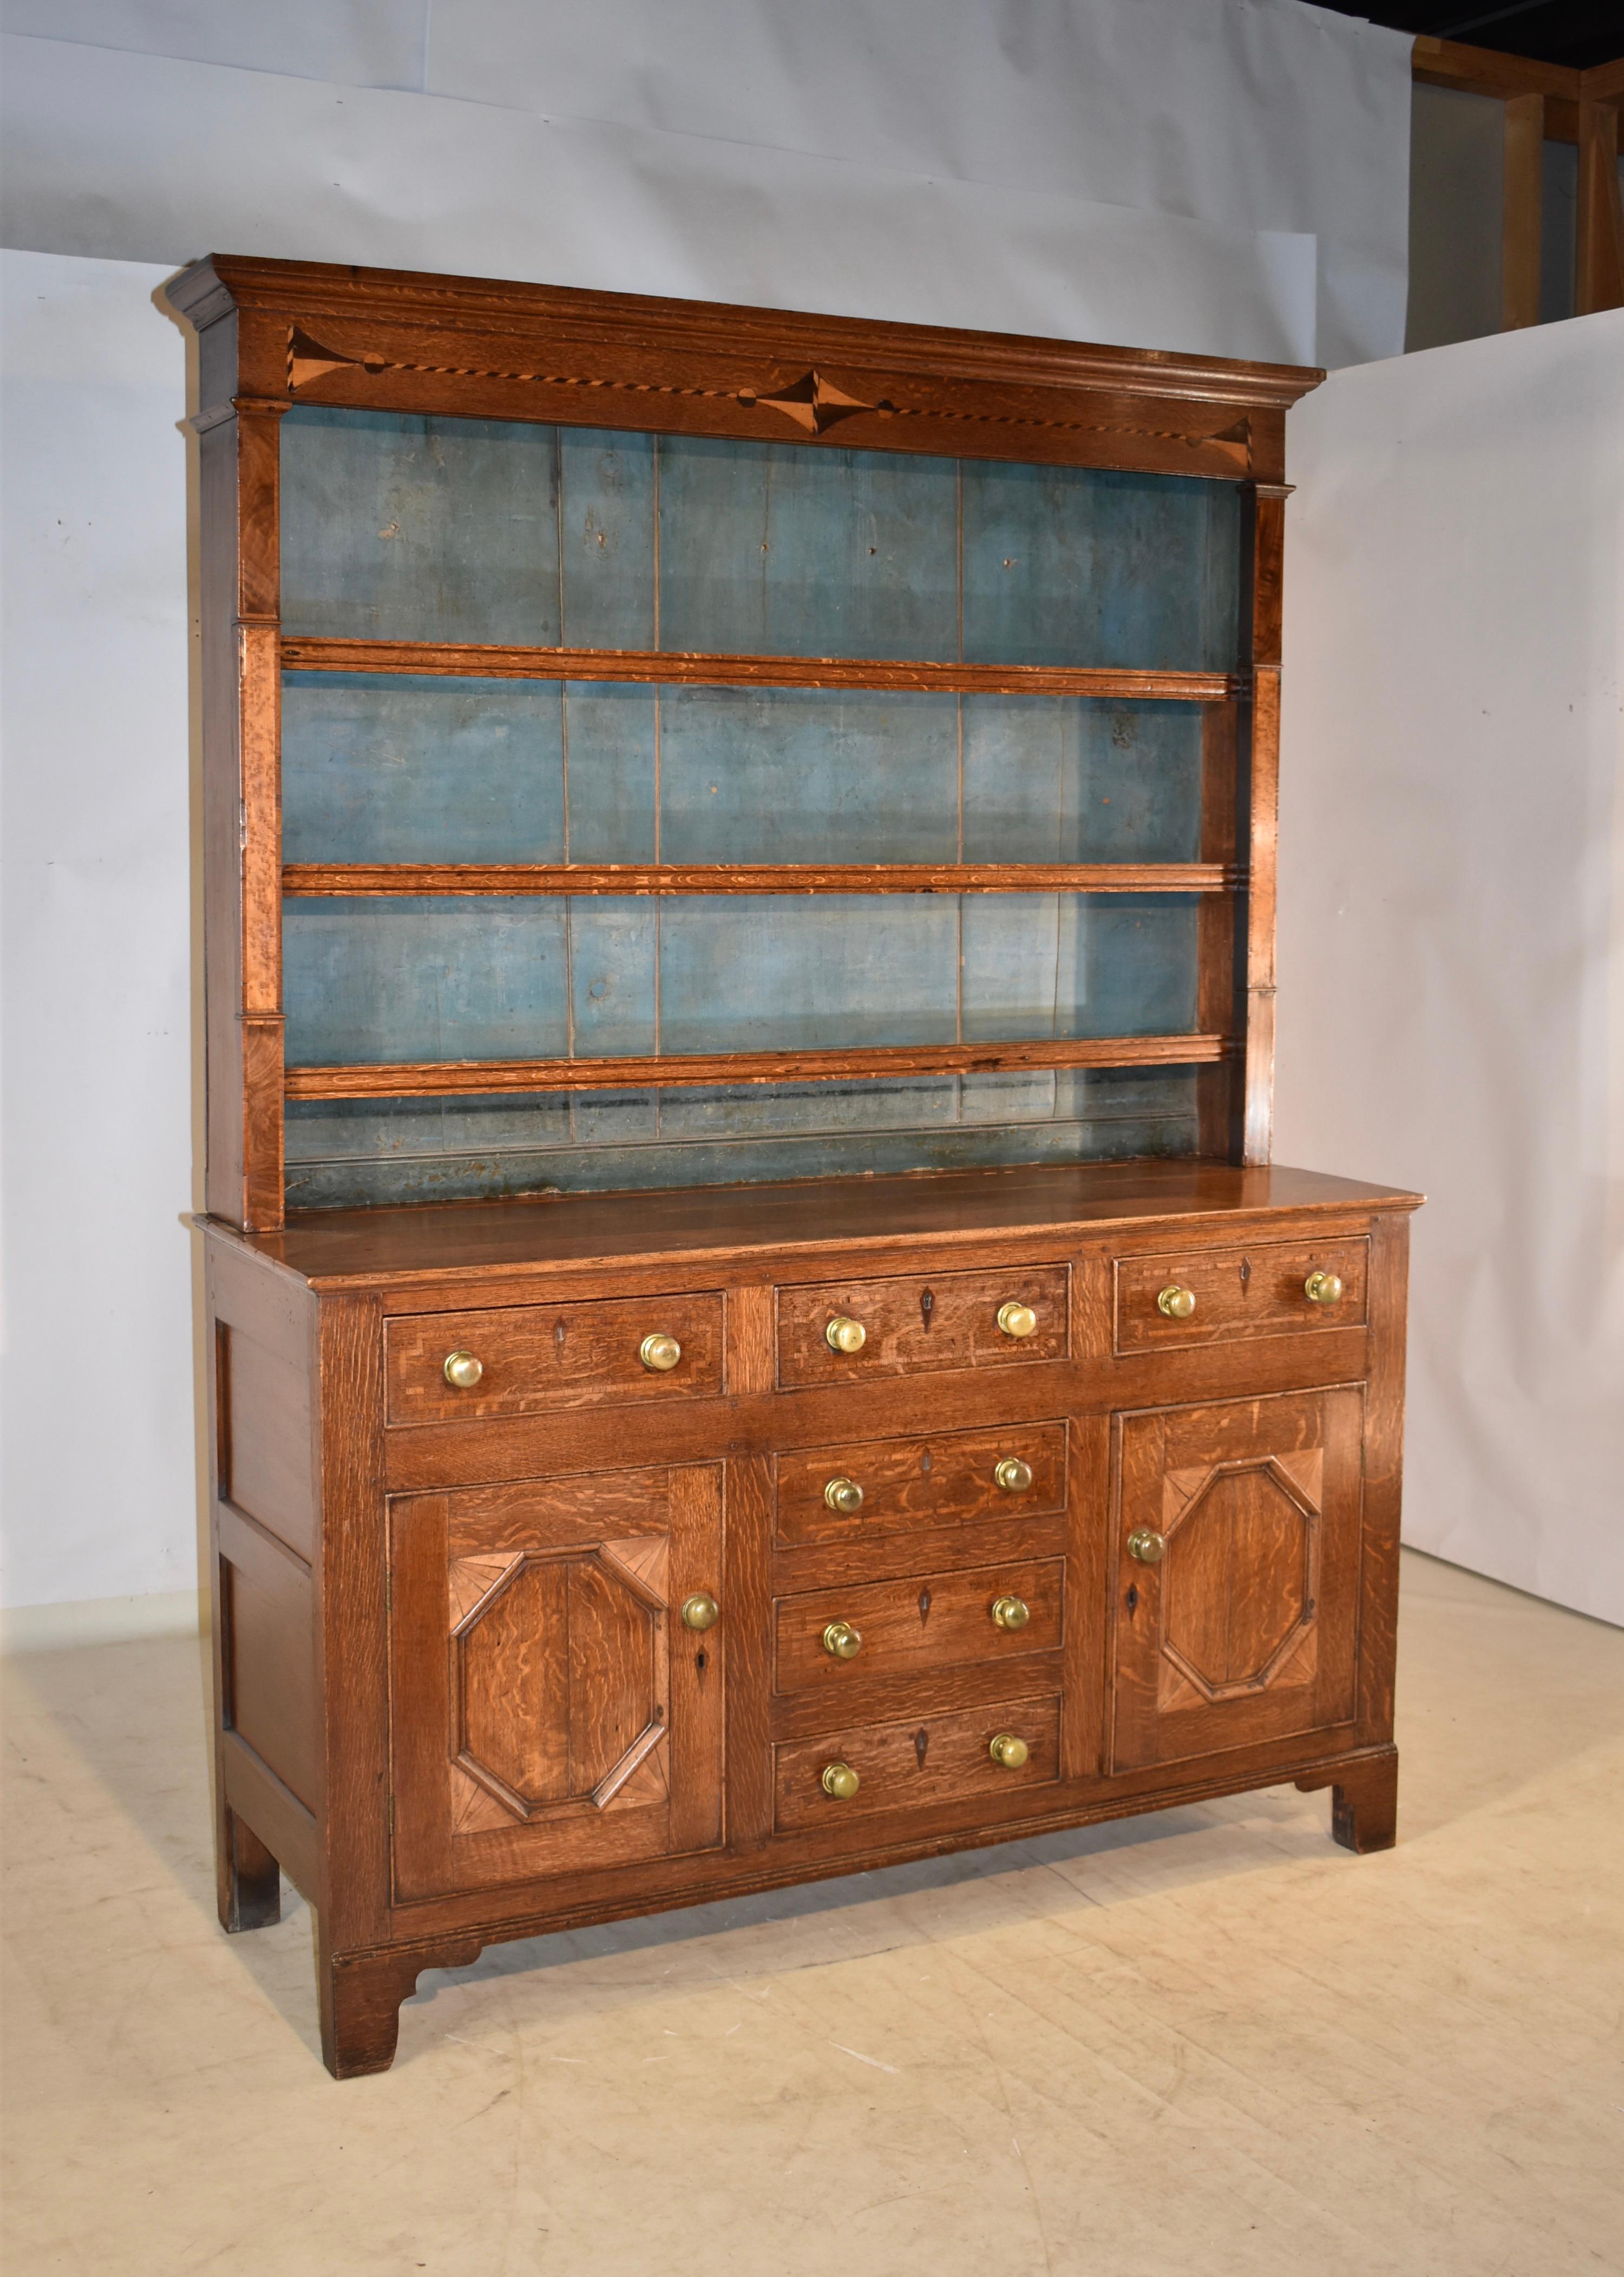 Early 19th century inlaid Welsh oak dresser. The dresser has a lovely and simple crown over a wonderful top with decorative inlay design. The top has three shelve, flanked by sides made from mahogany and bird's eye maple accents. The back boards are